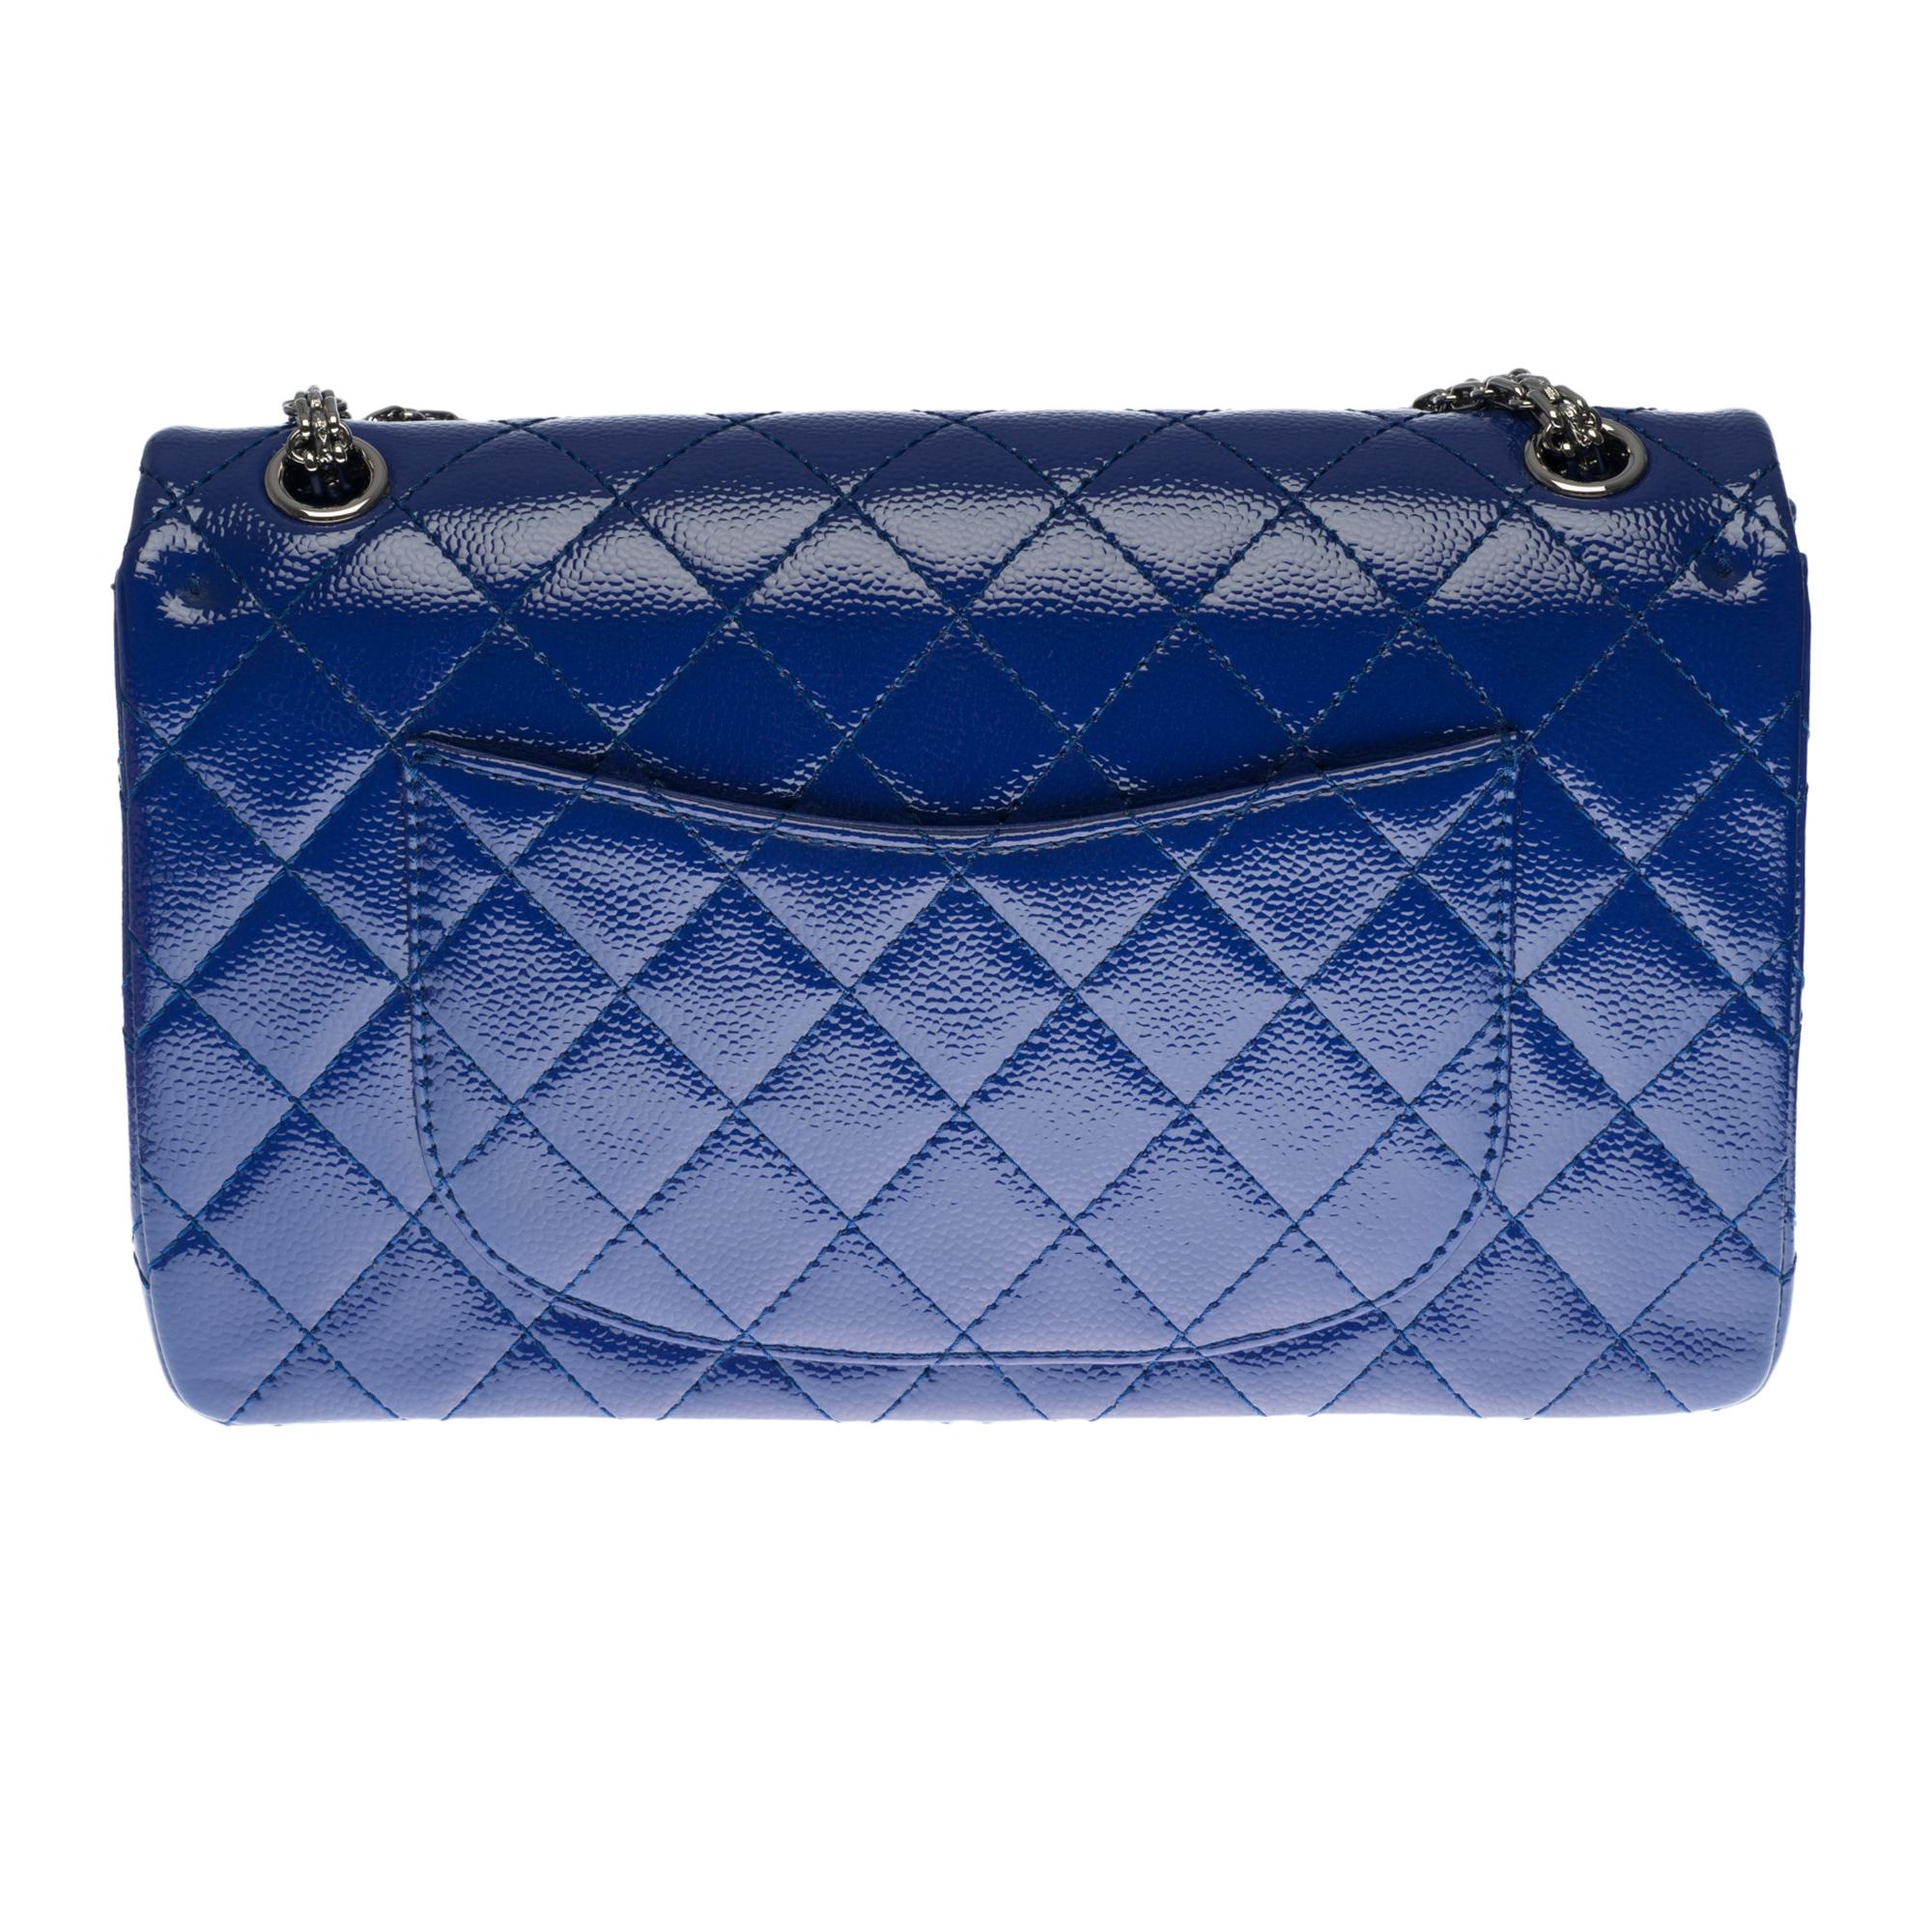 Stunning Chanel 2.55 Classic handbag in electric blue quilted patent leather (with violet reflection), black silver metal hardware, a Mademoiselle chain handle transformable into silver metal allowing a hand or shoulder or shoulder